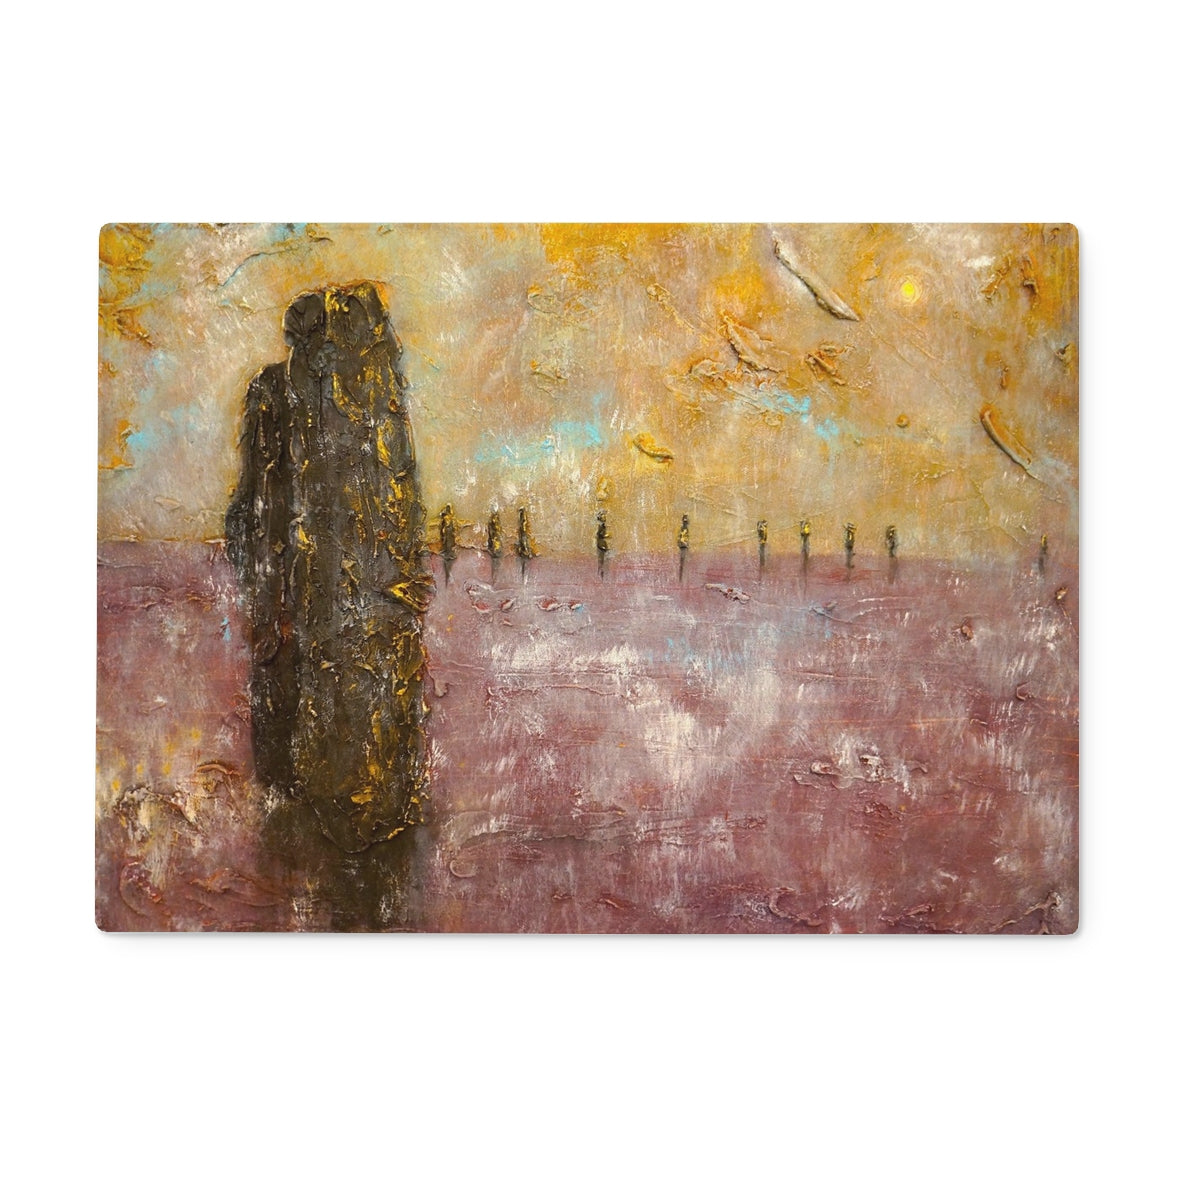 Brodgar Mist Orkney Art Gifts Glass Chopping Board-Glass Chopping Boards-Orkney Art Gallery-15"x11" Rectangular-Paintings, Prints, Homeware, Art Gifts From Scotland By Scottish Artist Kevin Hunter